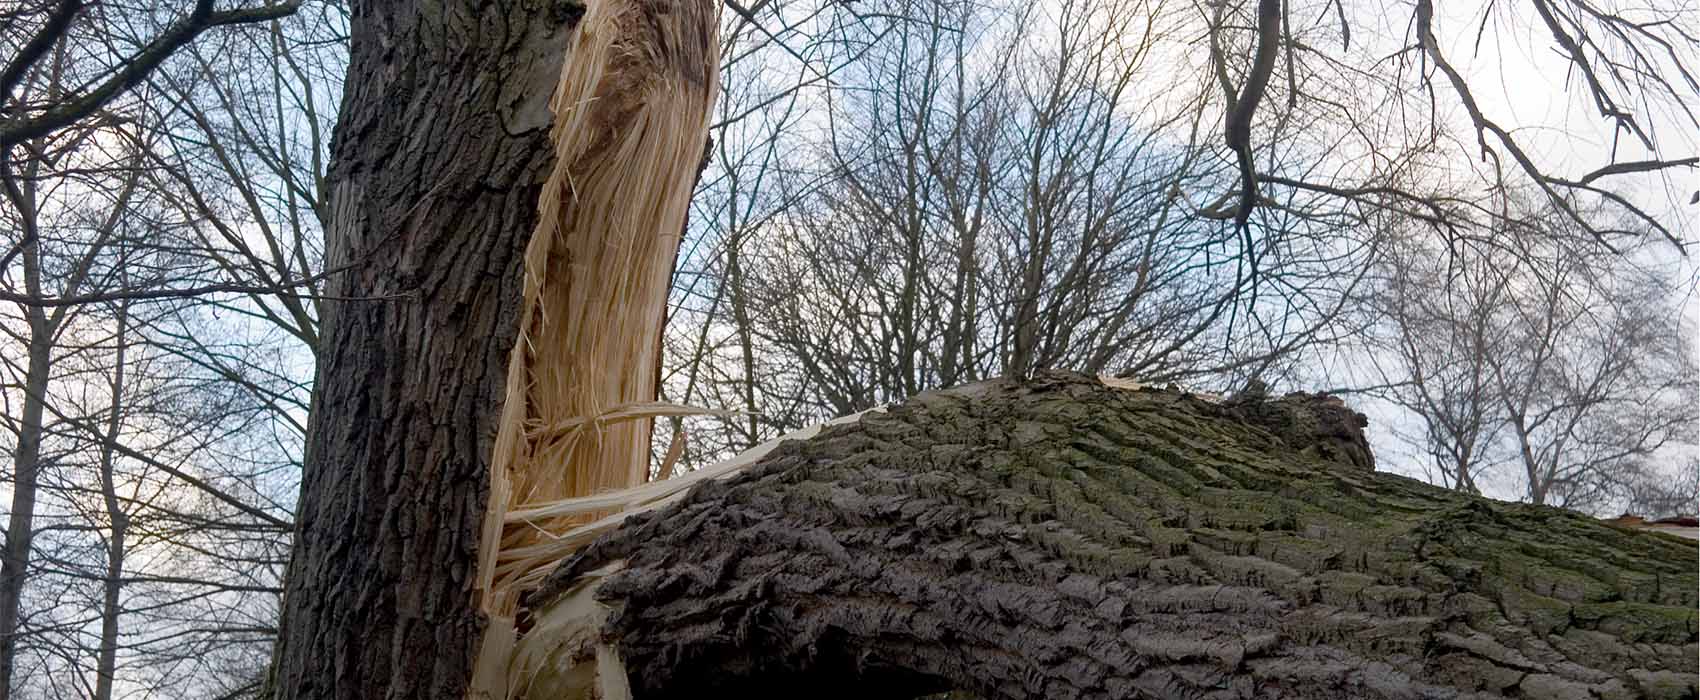 Tree limb partially severed from tree due to wind storm